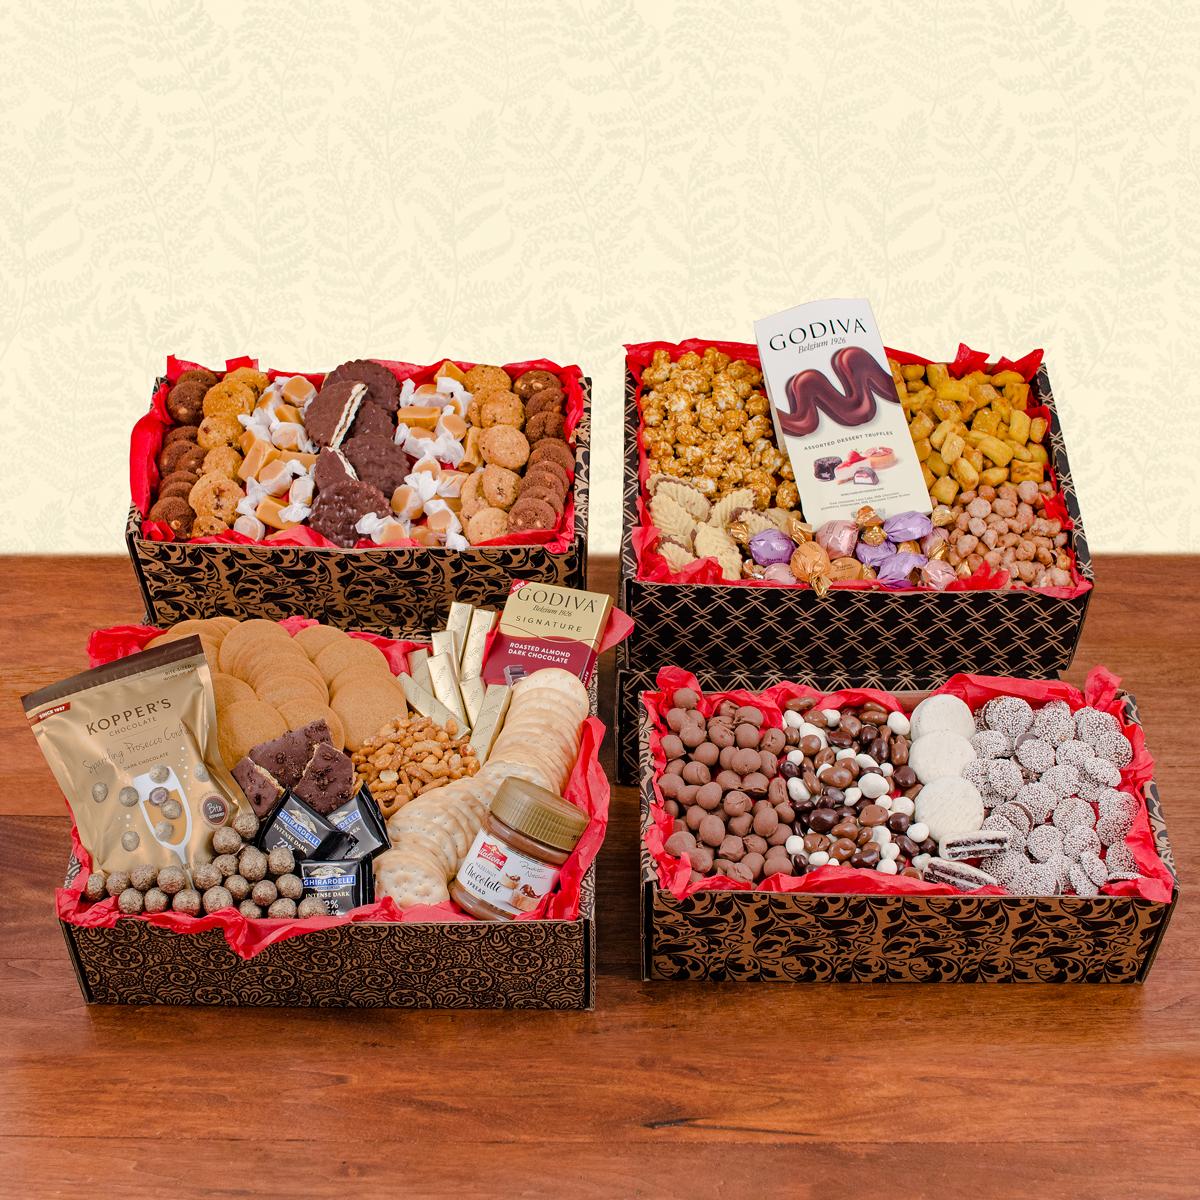 Gourmet gift baskets with assorted chocolates, cookies, and nuts on a table.